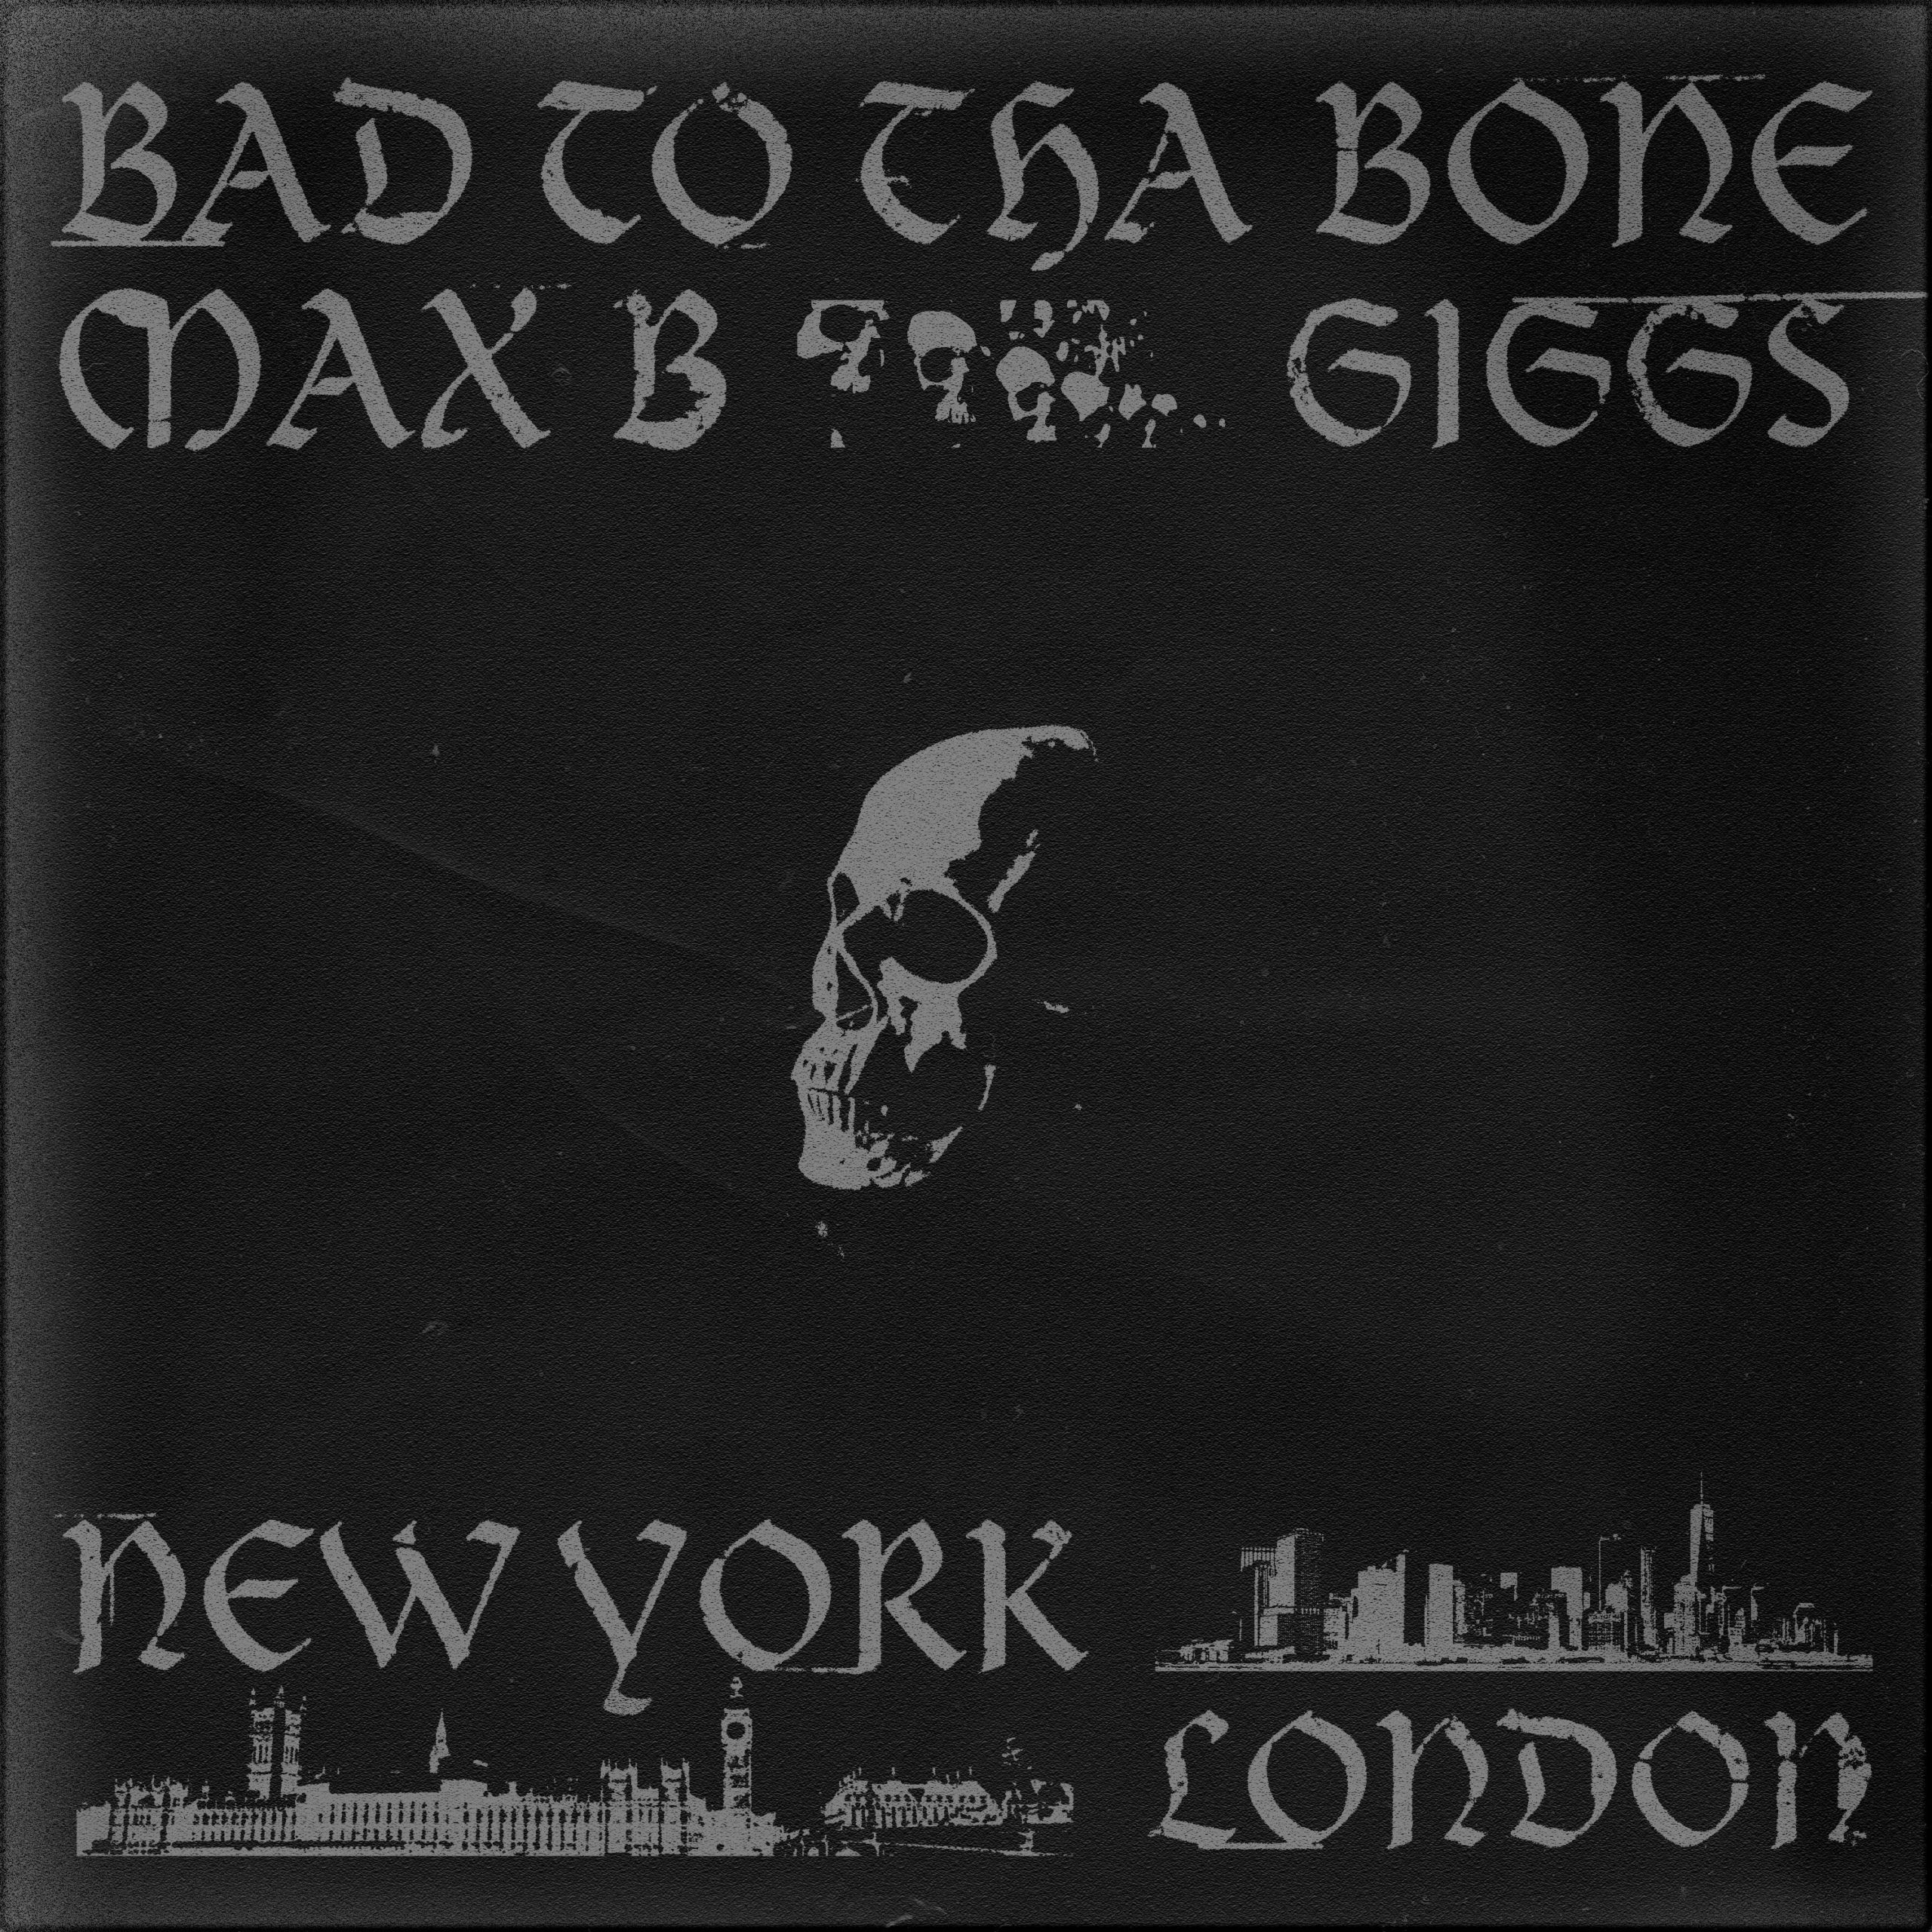 Max B Releases New Track Bad To The Bone Featuring Uk Rapper Giggs Respect